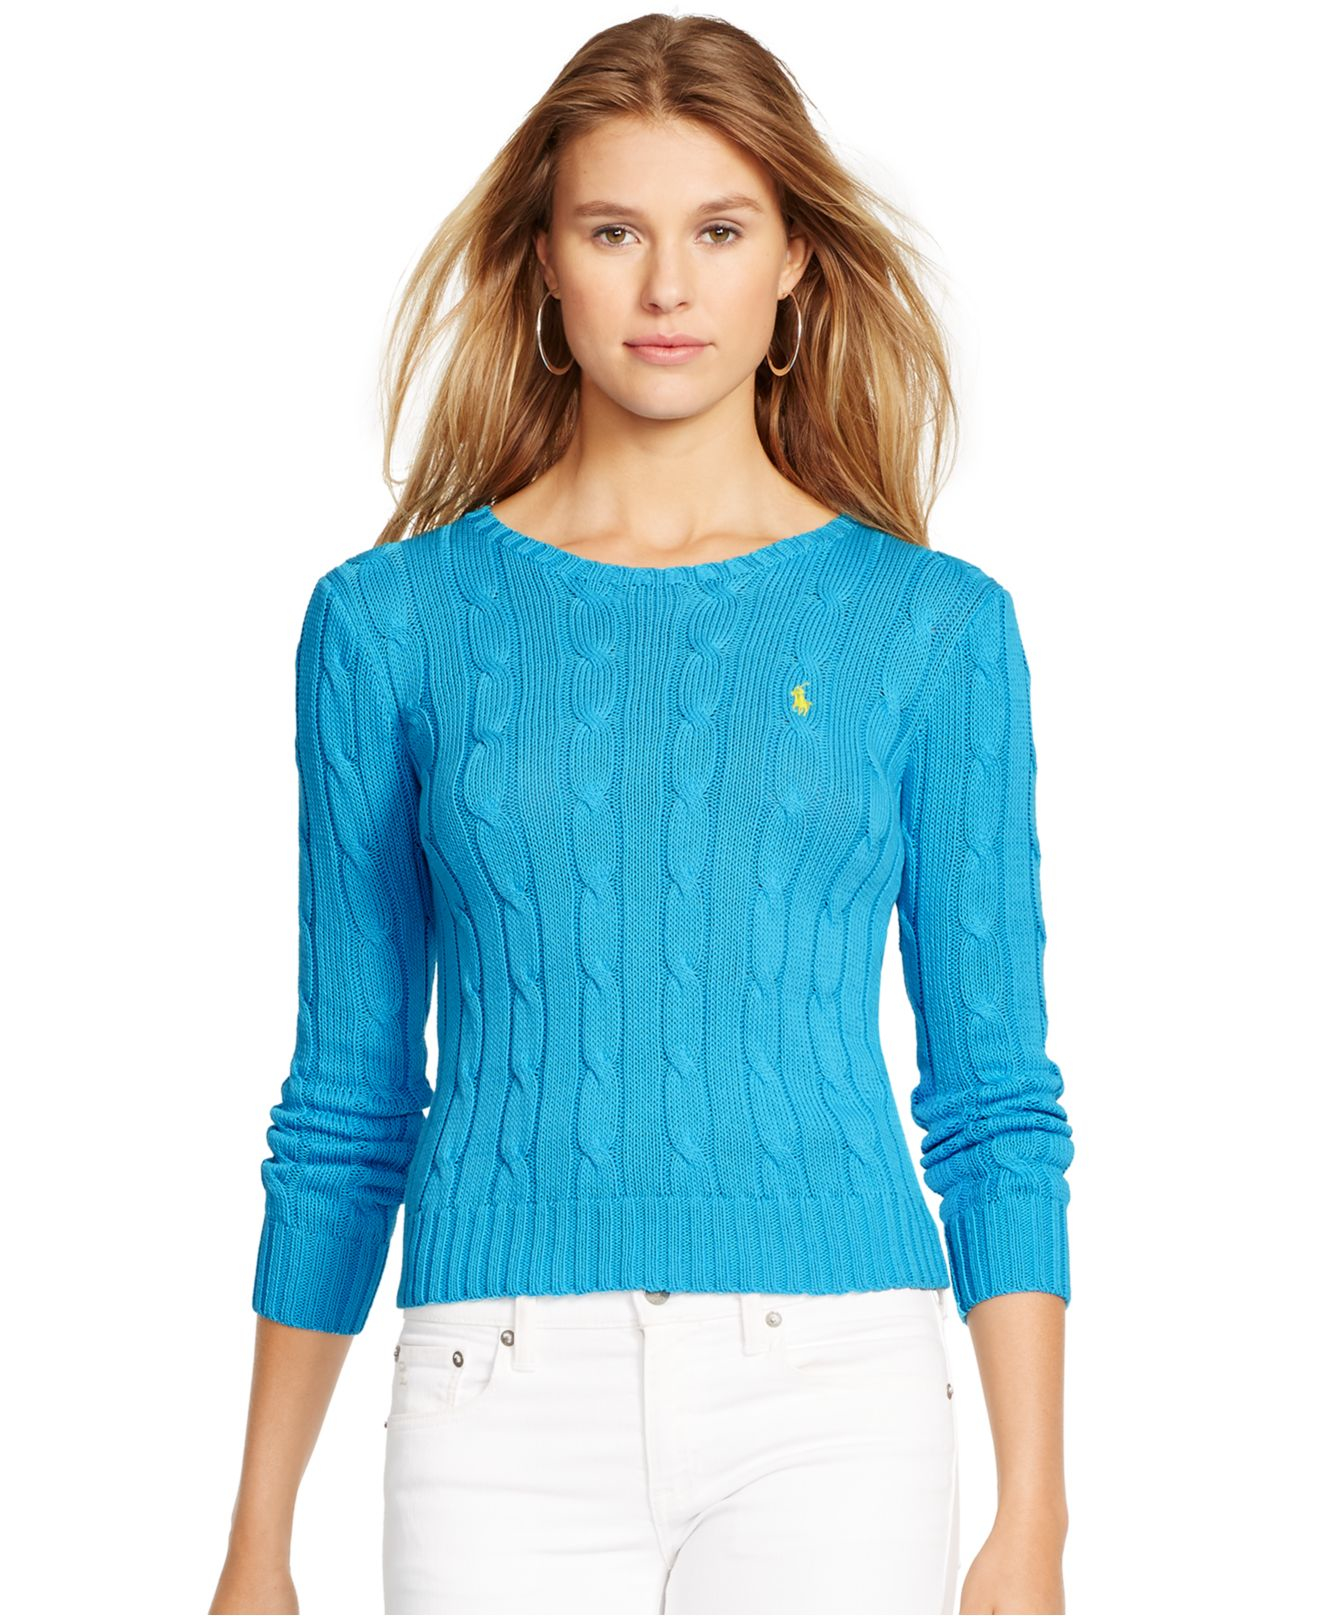 Lyst - Polo Ralph Lauren Cable-knit Cotton Sweater in Blue